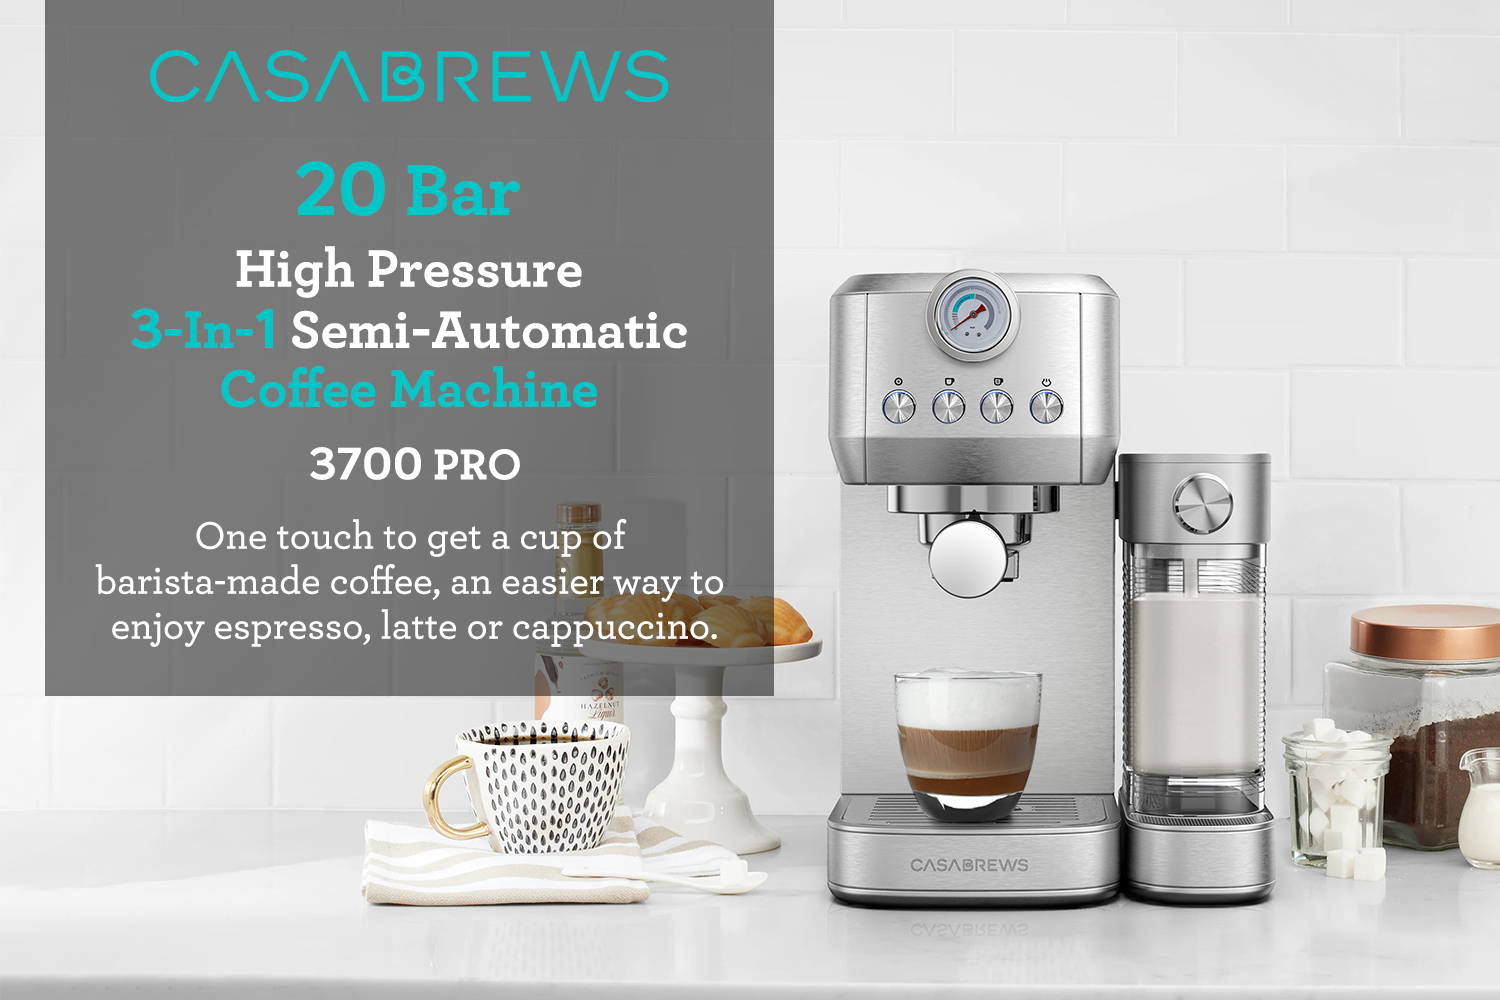 Casabrews 20 bar high pressure 3-in-1 semi-automatic coffee amchine 3700 pro one touch to get a cup of barista-made coffee, an easier way to enjoy espresso, latte or cappuccino.